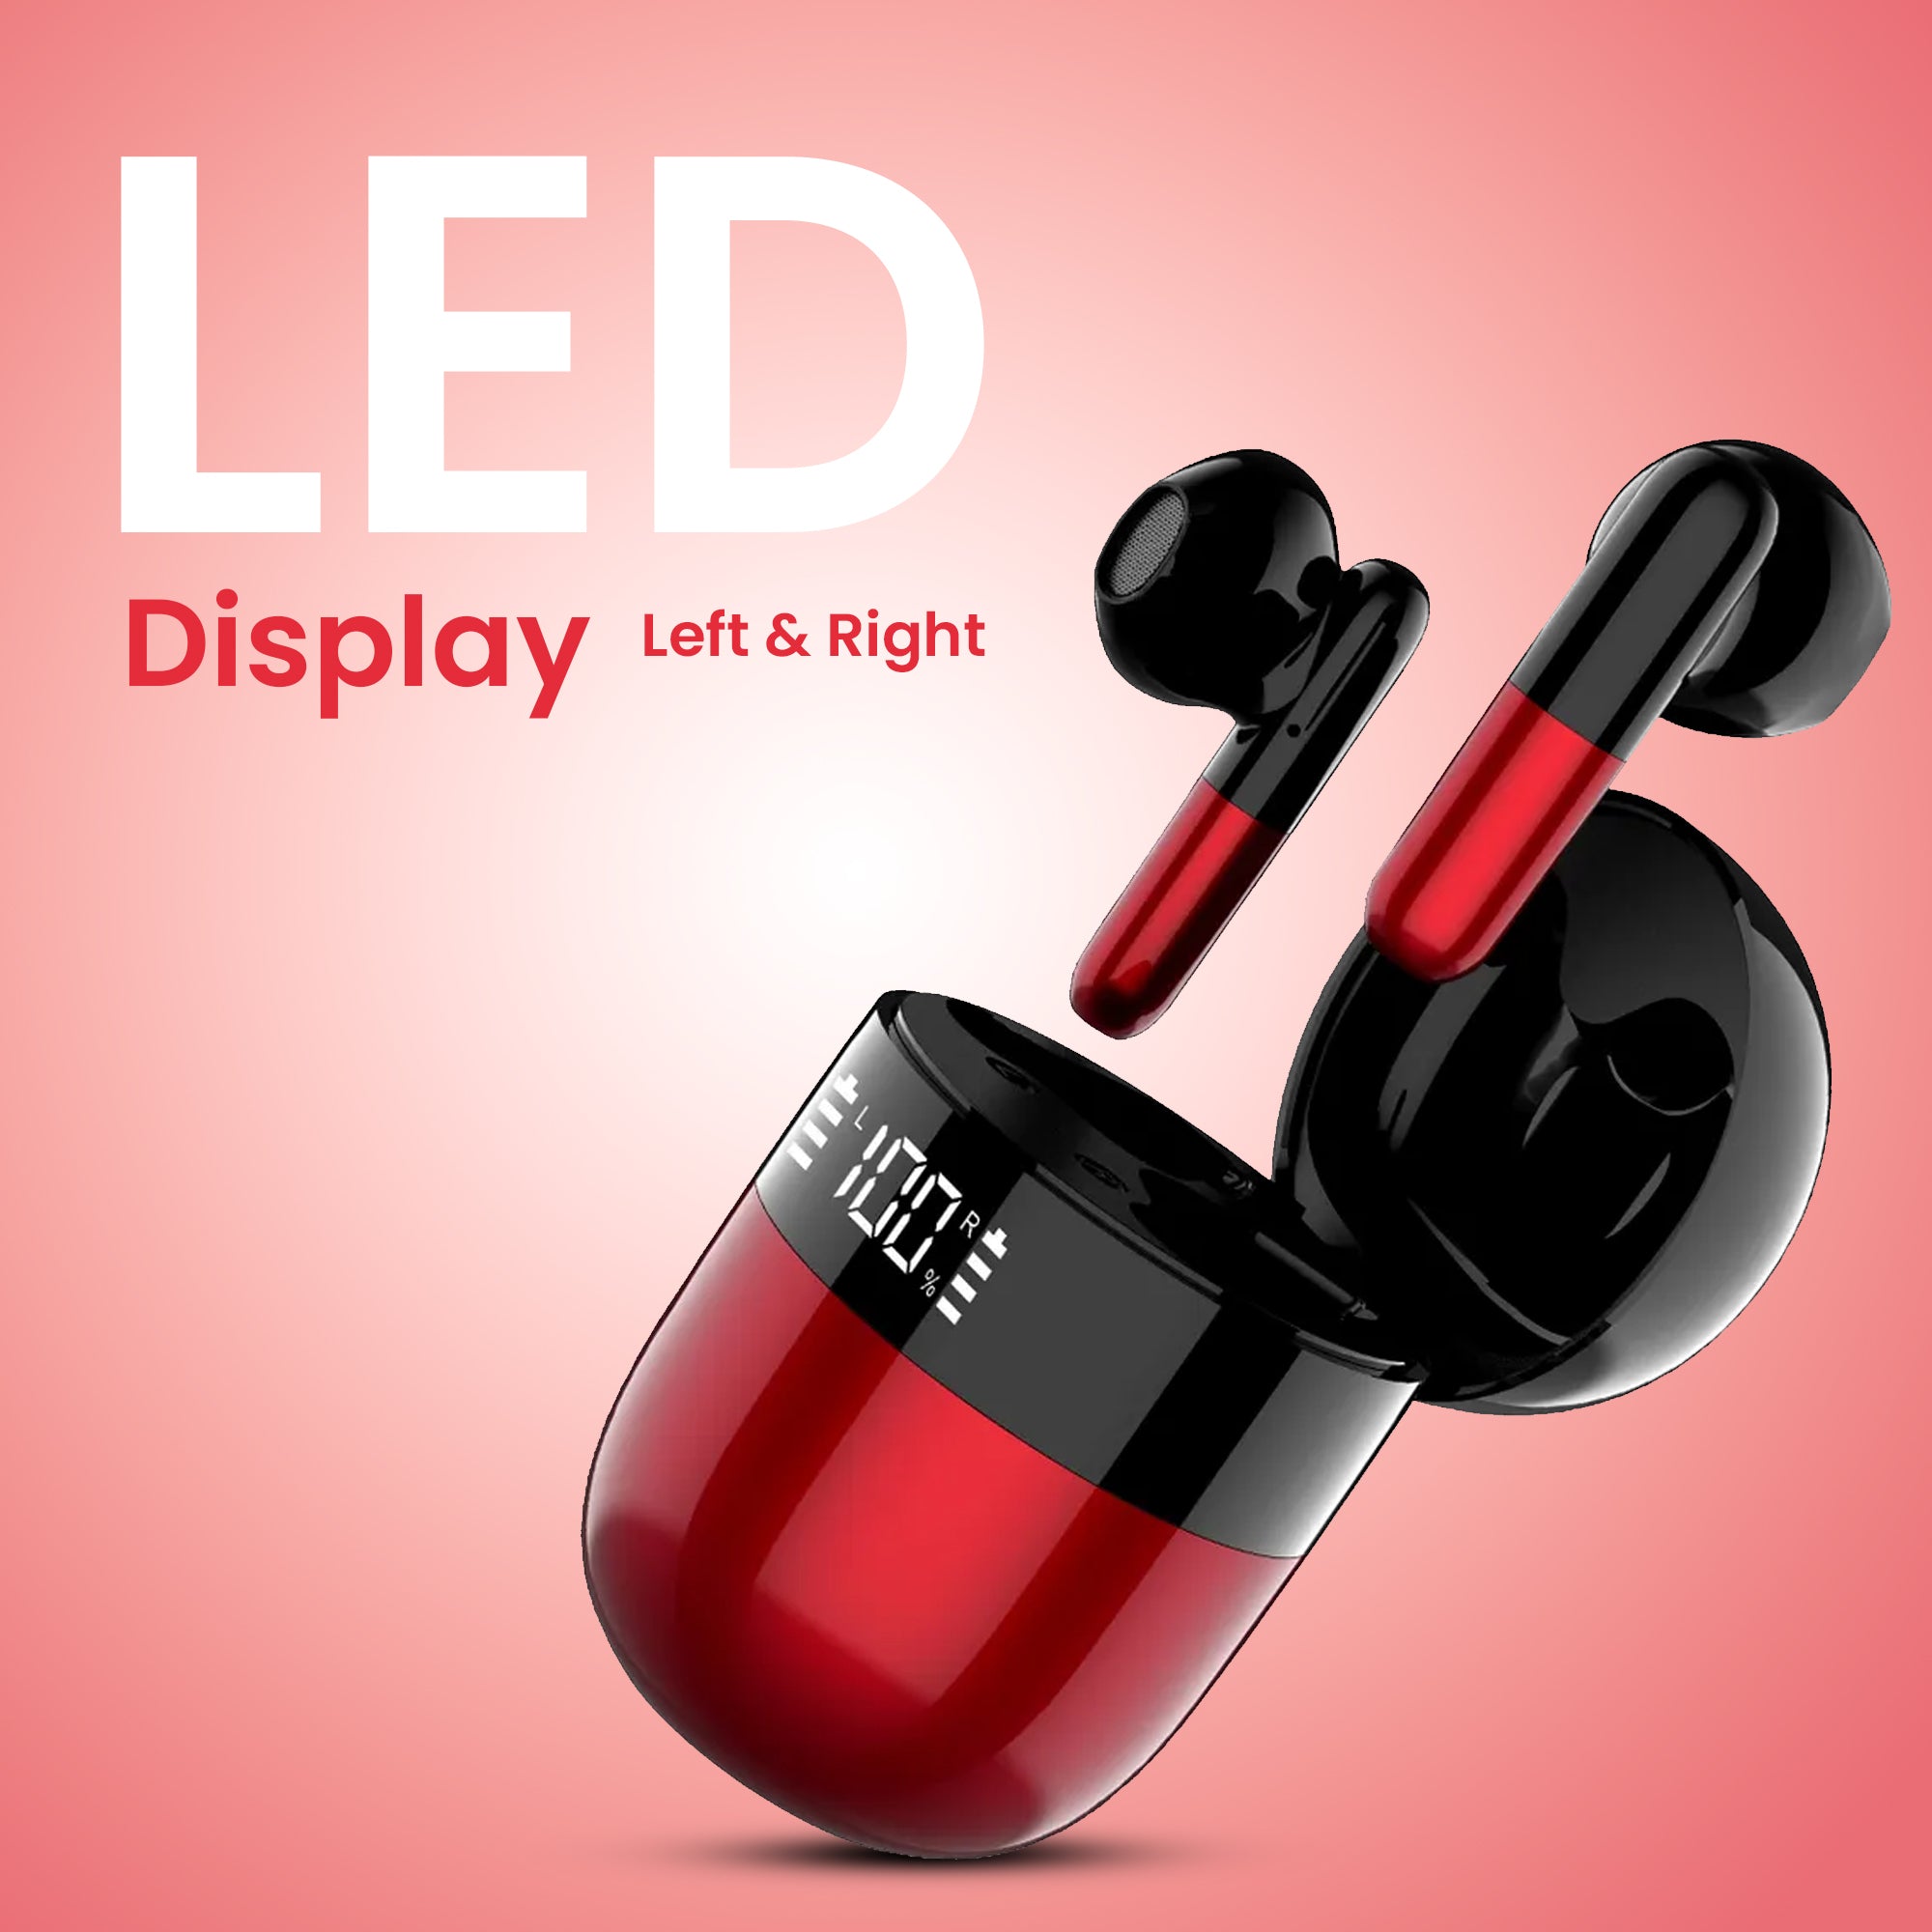 LED Display on red and black earbuds case